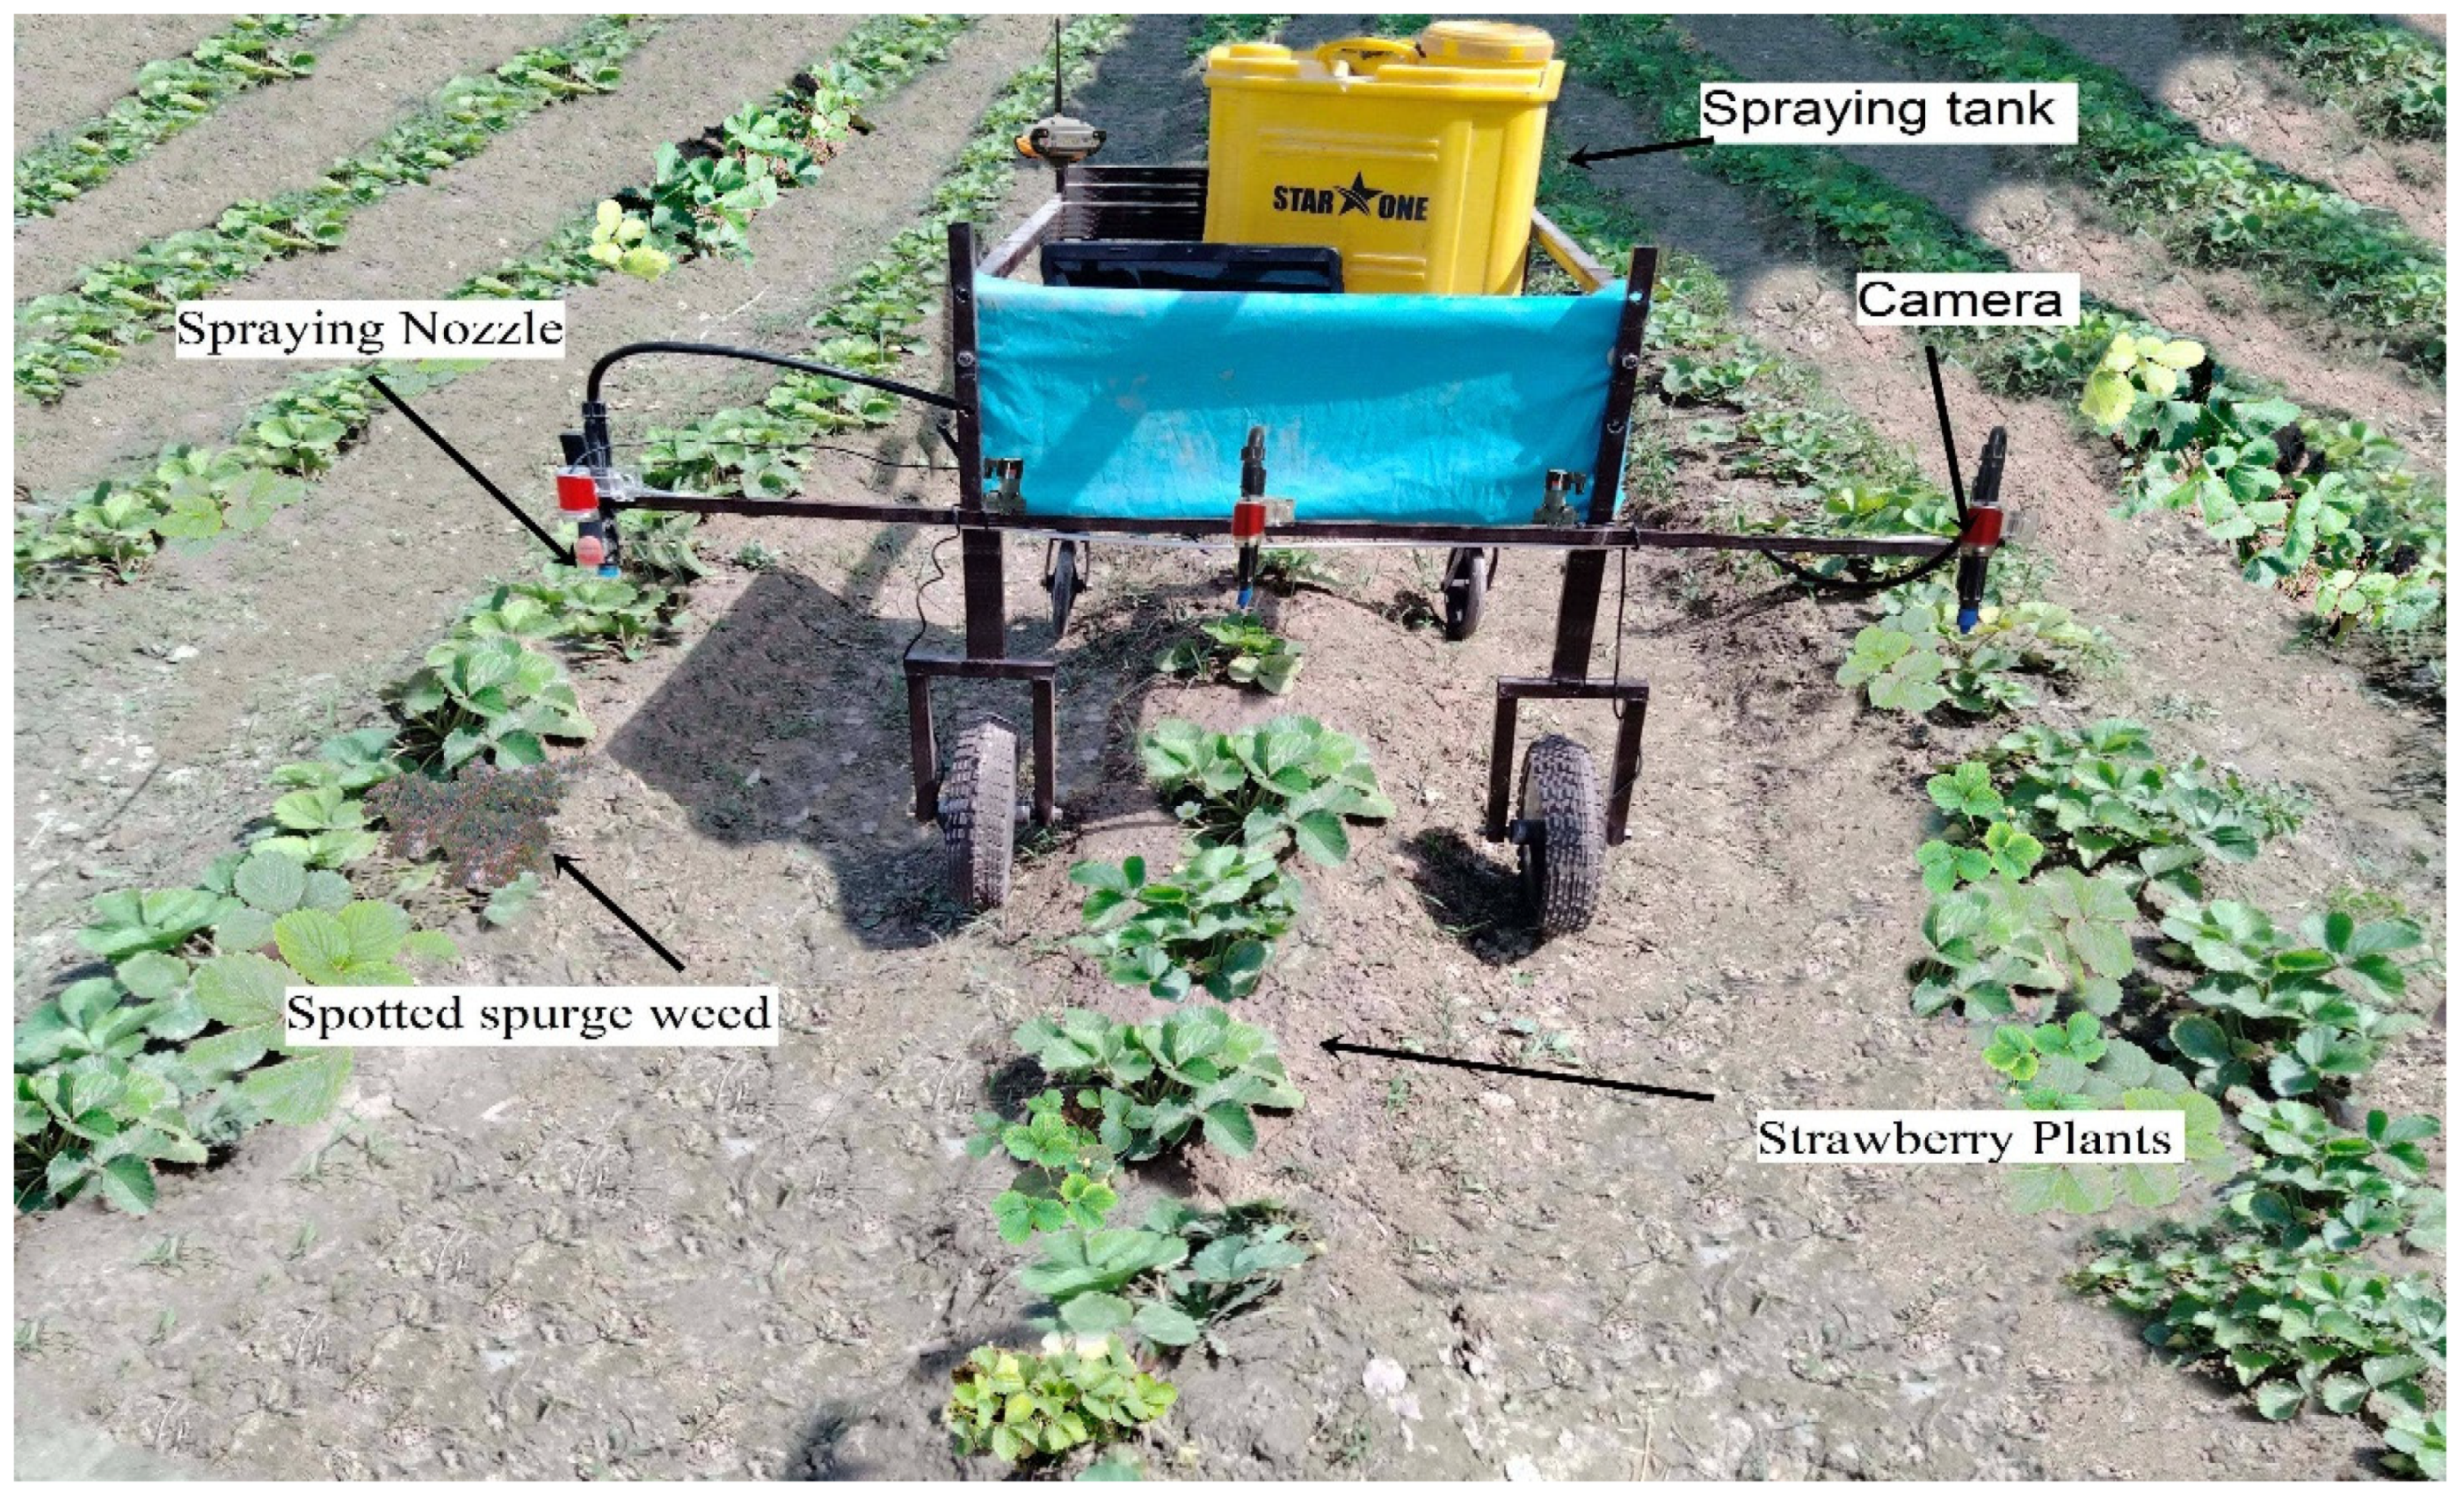 Agronomy | Free Full-Text | Development of Deep Learning-Based Variable Rate  Agrochemical Spraying System for Targeted Weeds Control in Strawberry Crop  | HTML